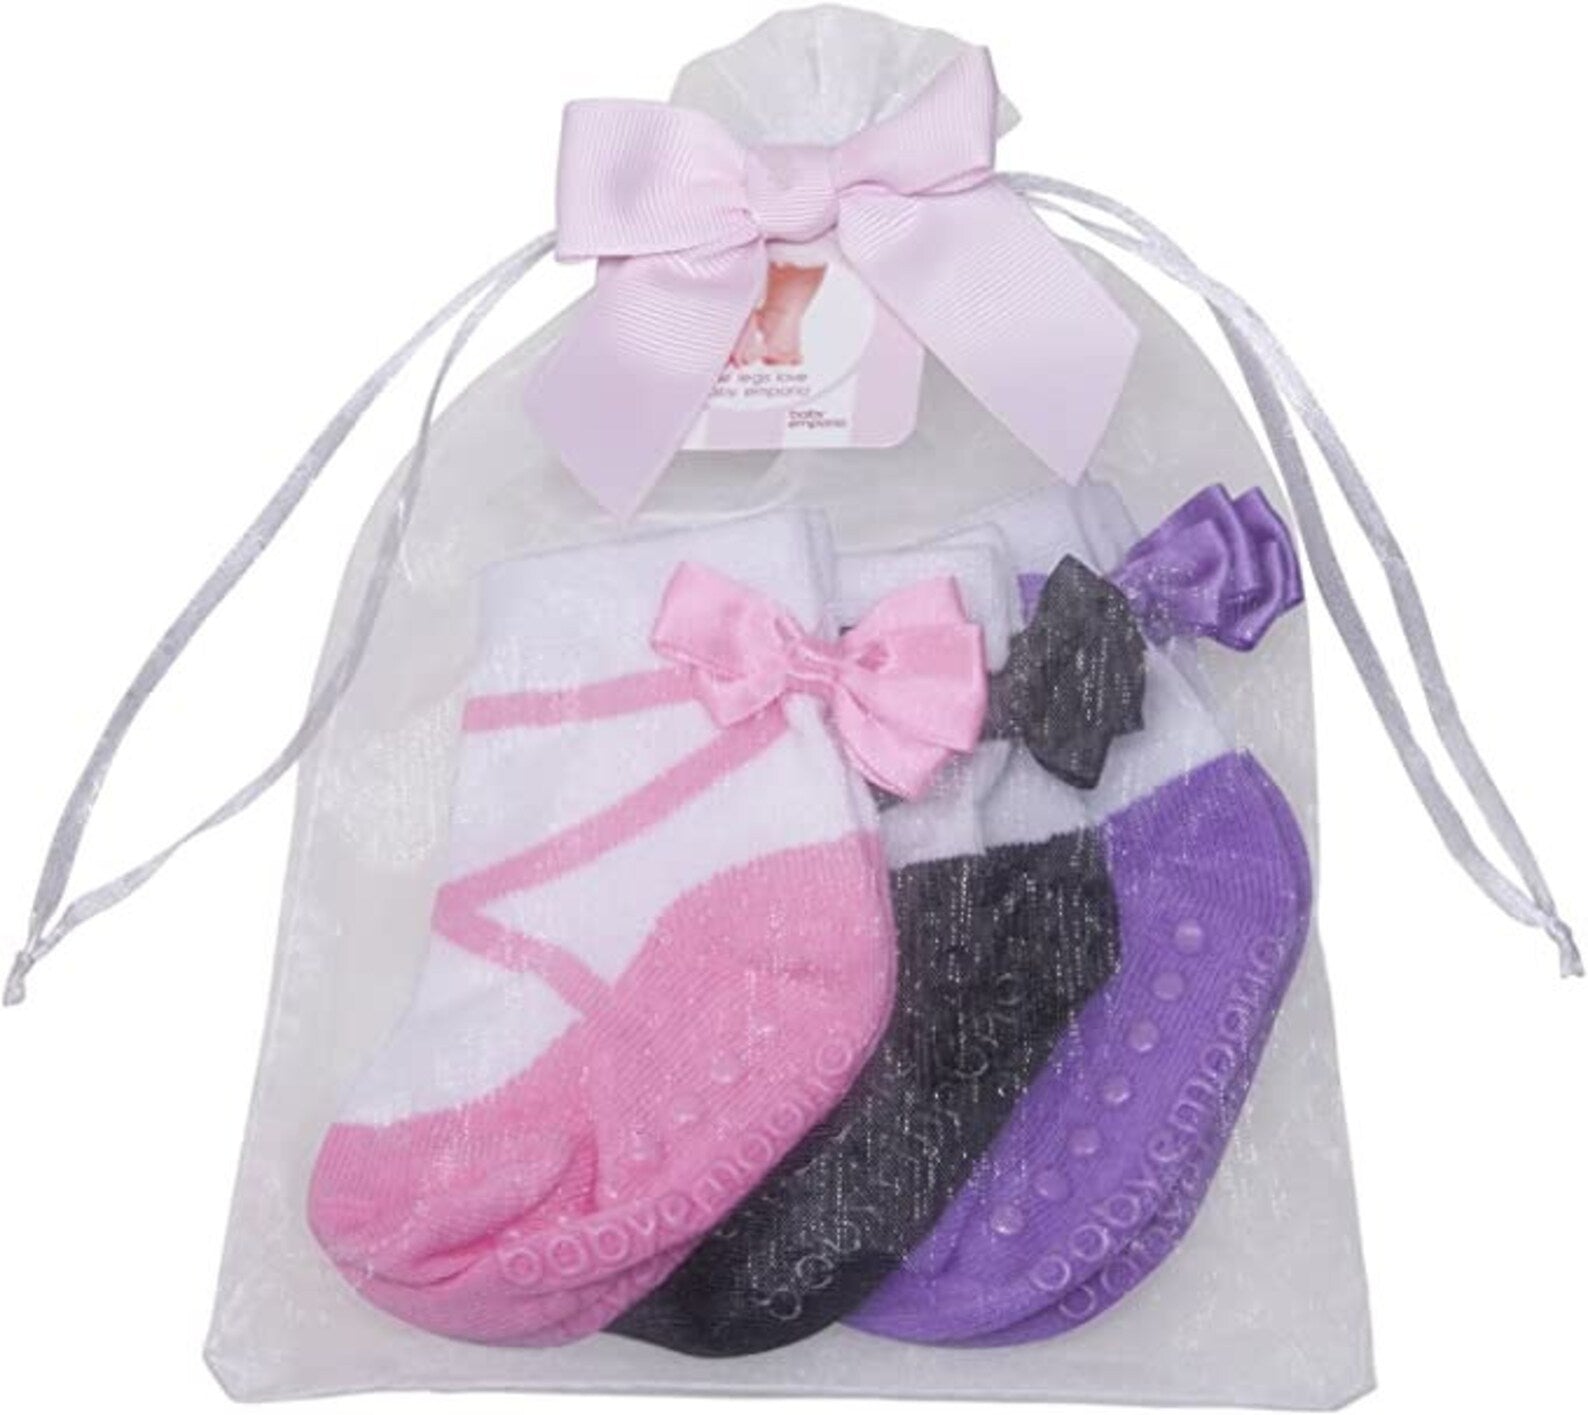 3 Pairs of Ballerina baby girl socks with ballet shoe design and satin bows, by Baby Emporio